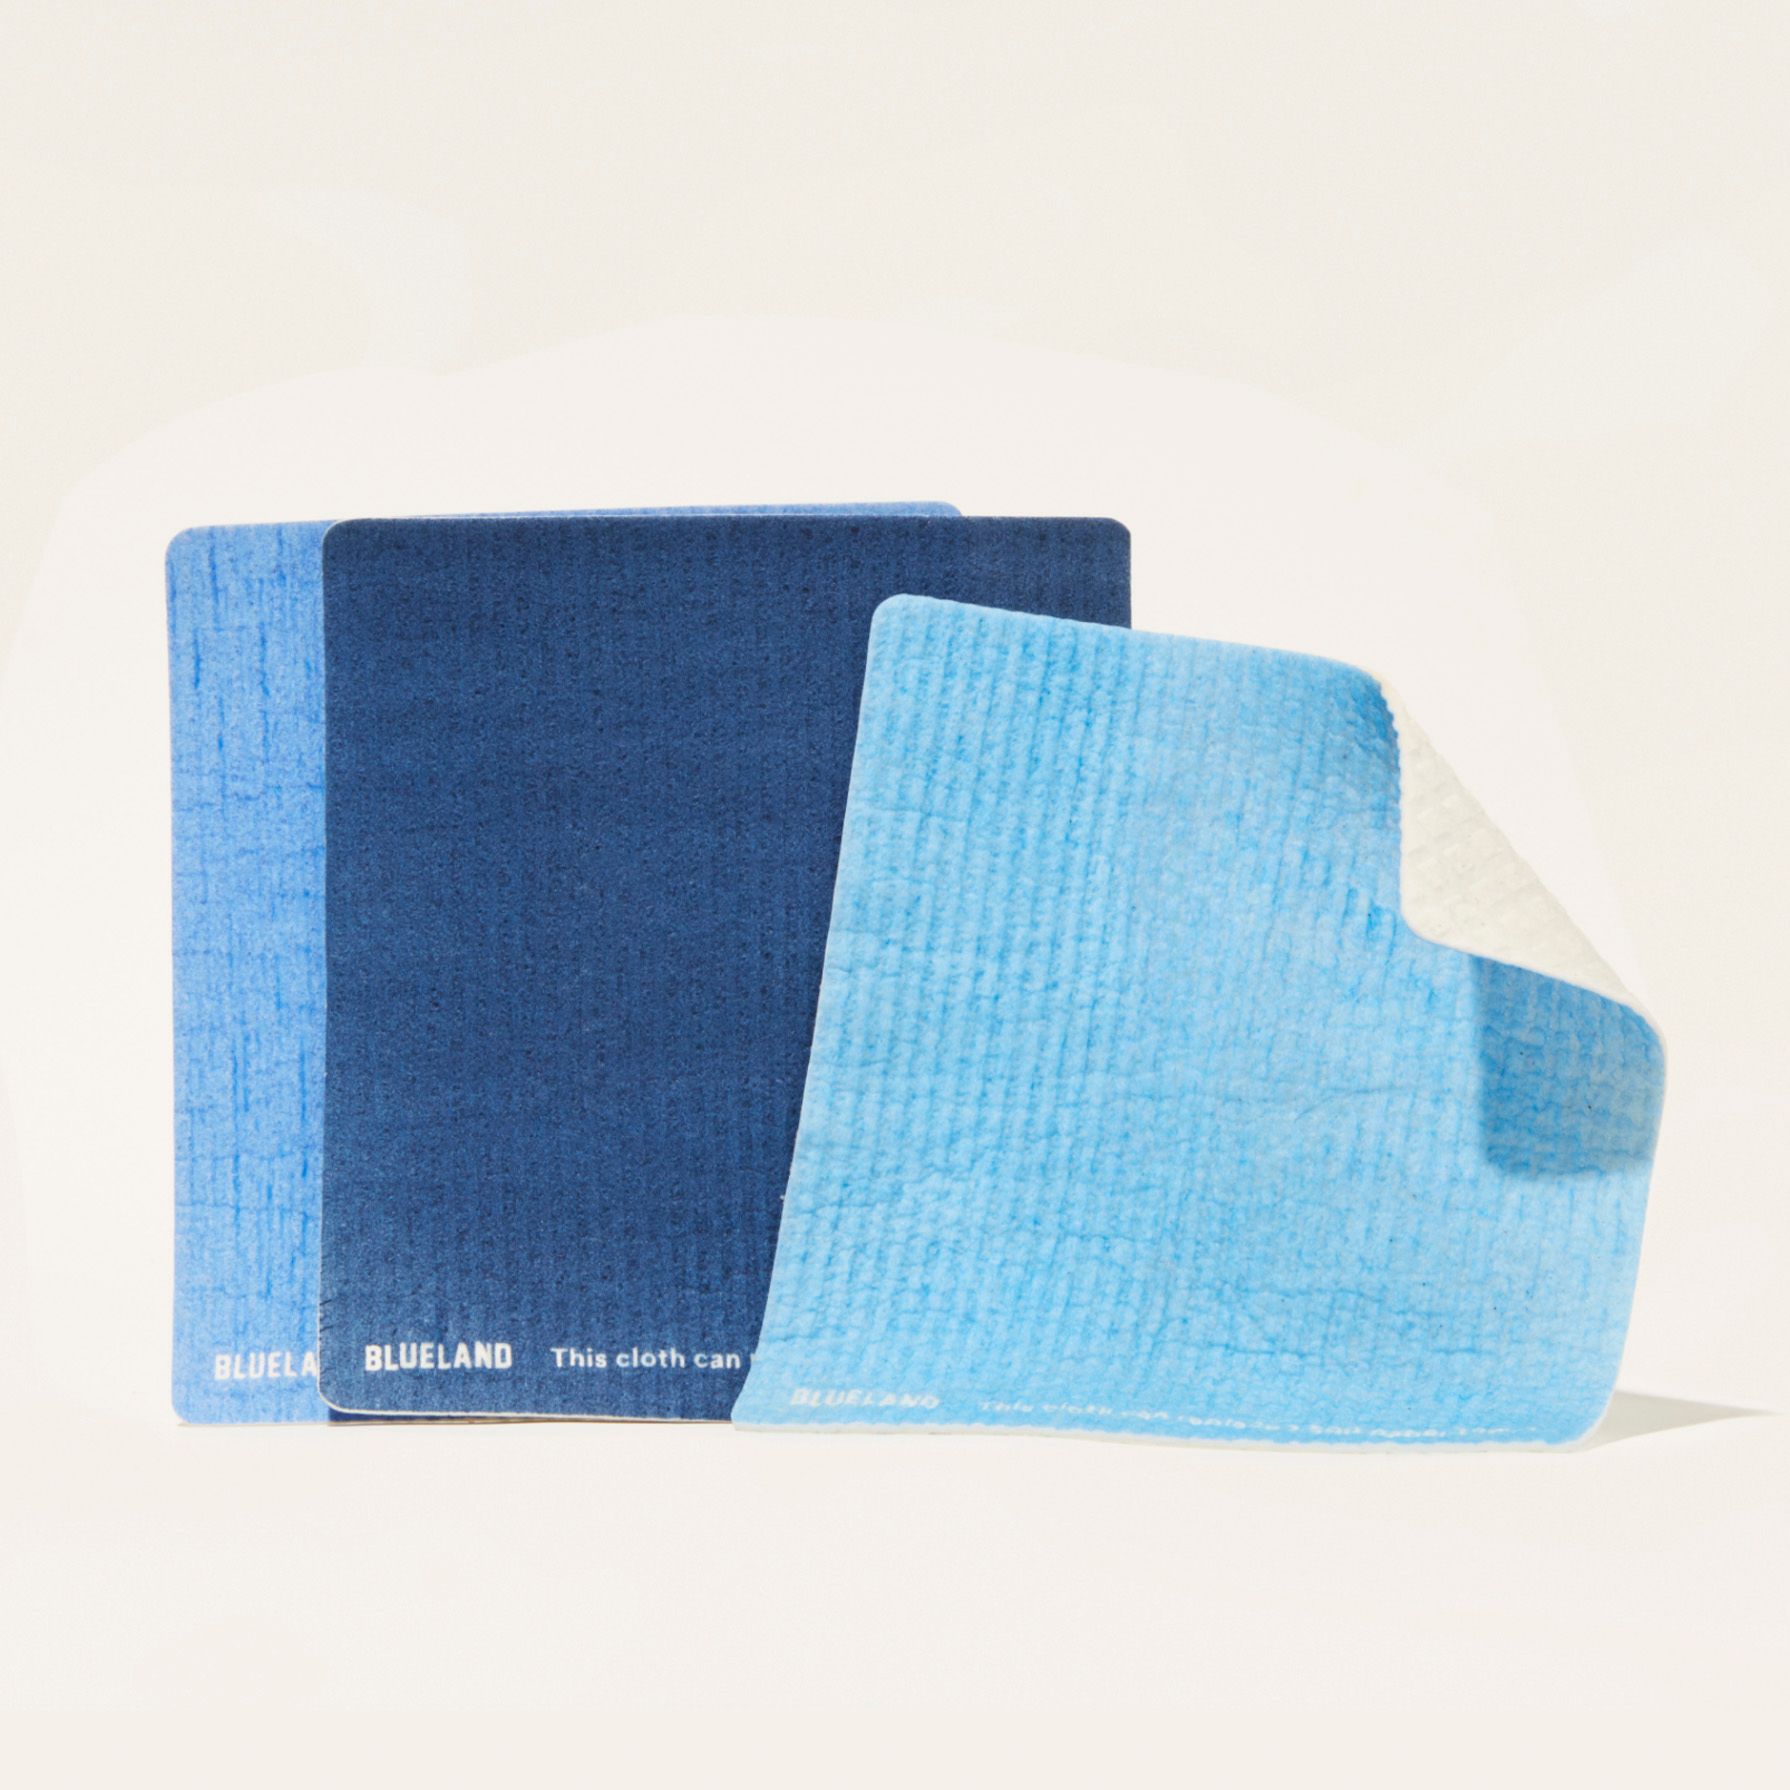 Blueland Cloud Cloth - 3 Pack - Reusable Ultra-Absorbent Swedish Dish Cloth, Natural Kitchen Sponge Towel, Made from All-Natural Cotton & Plant